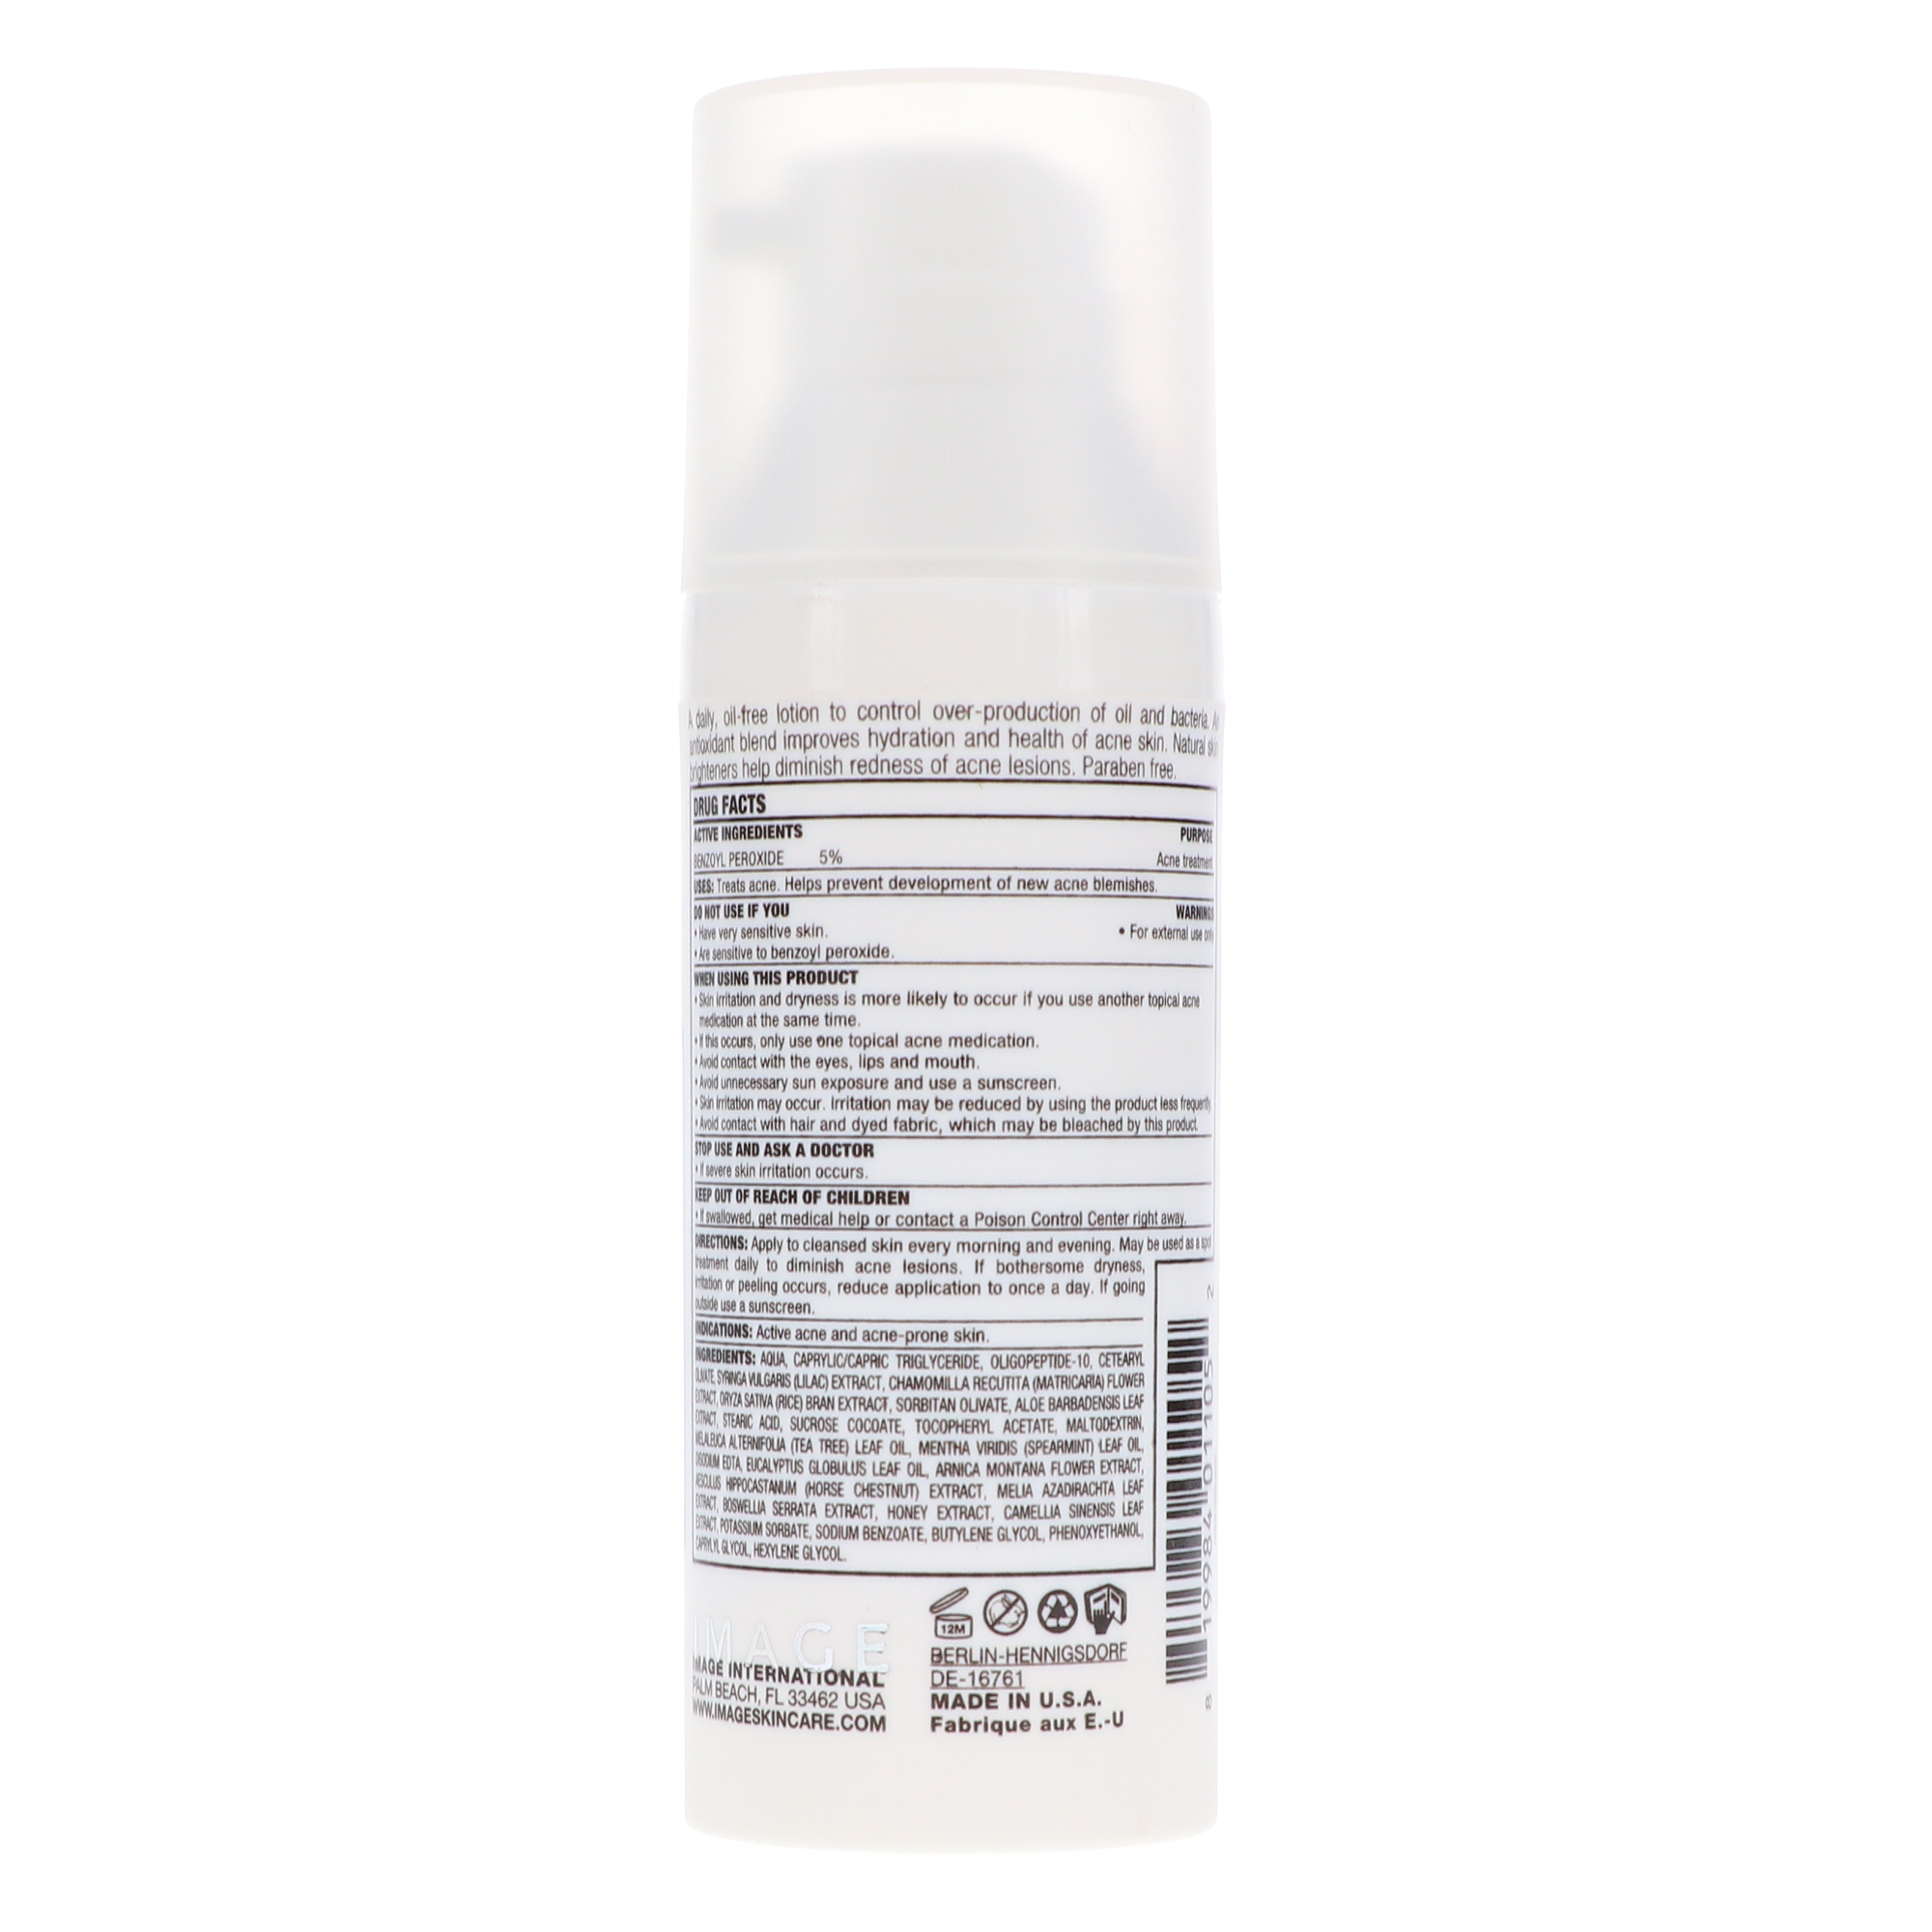 Image Clear Cell Acne Lotion, 1.7 Oz - image 5 of 8